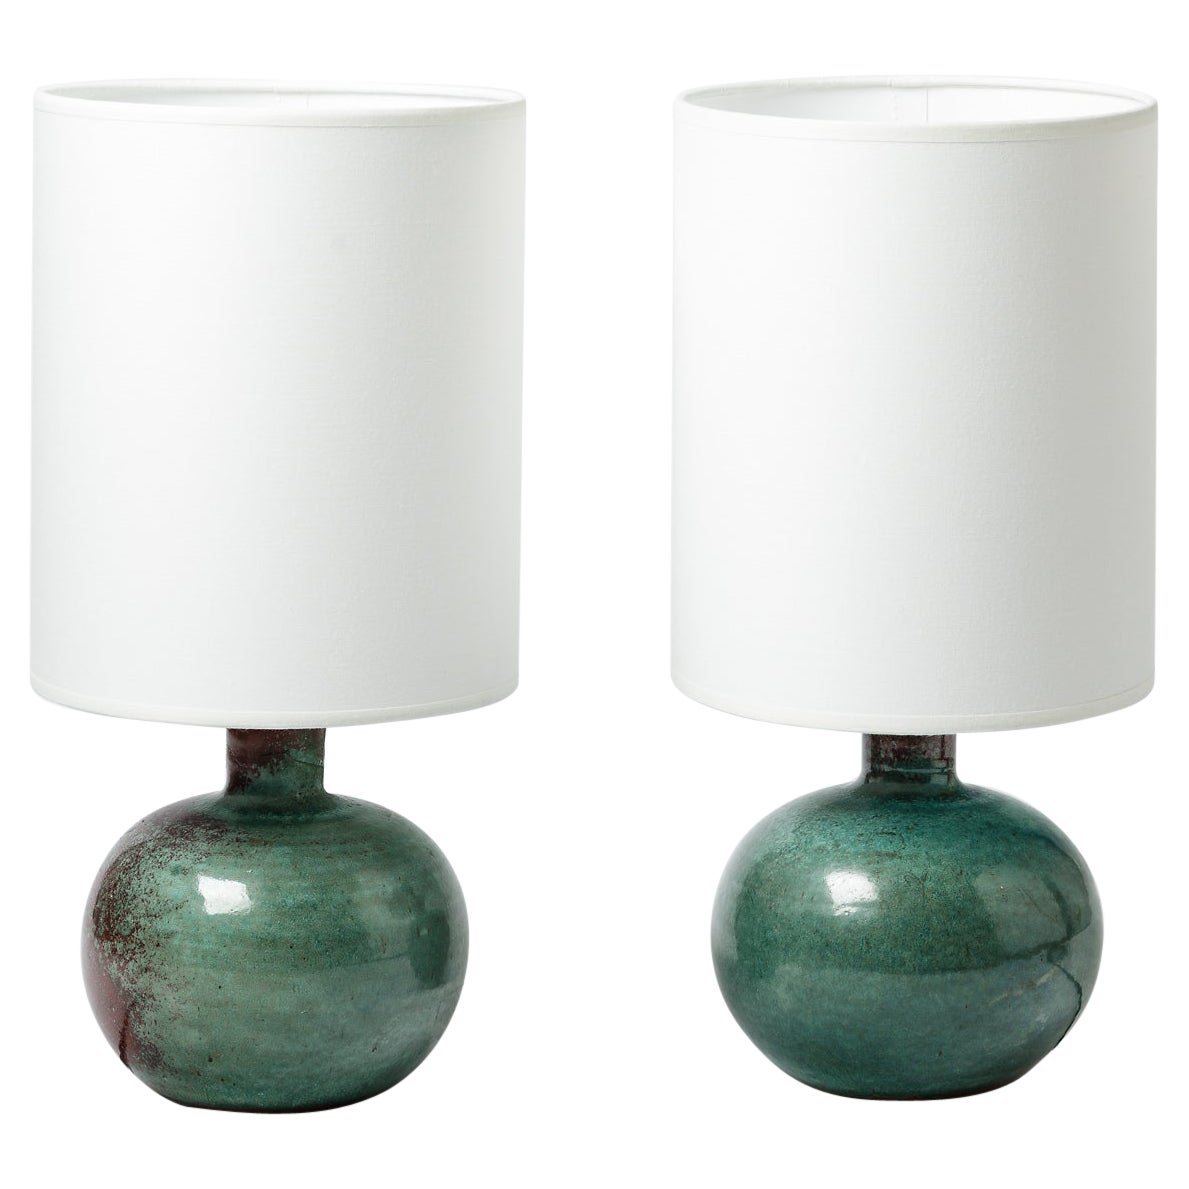 Pair of Ceramic Table Lamps by La Borne Potter's, circa 1960-1970 For Sale